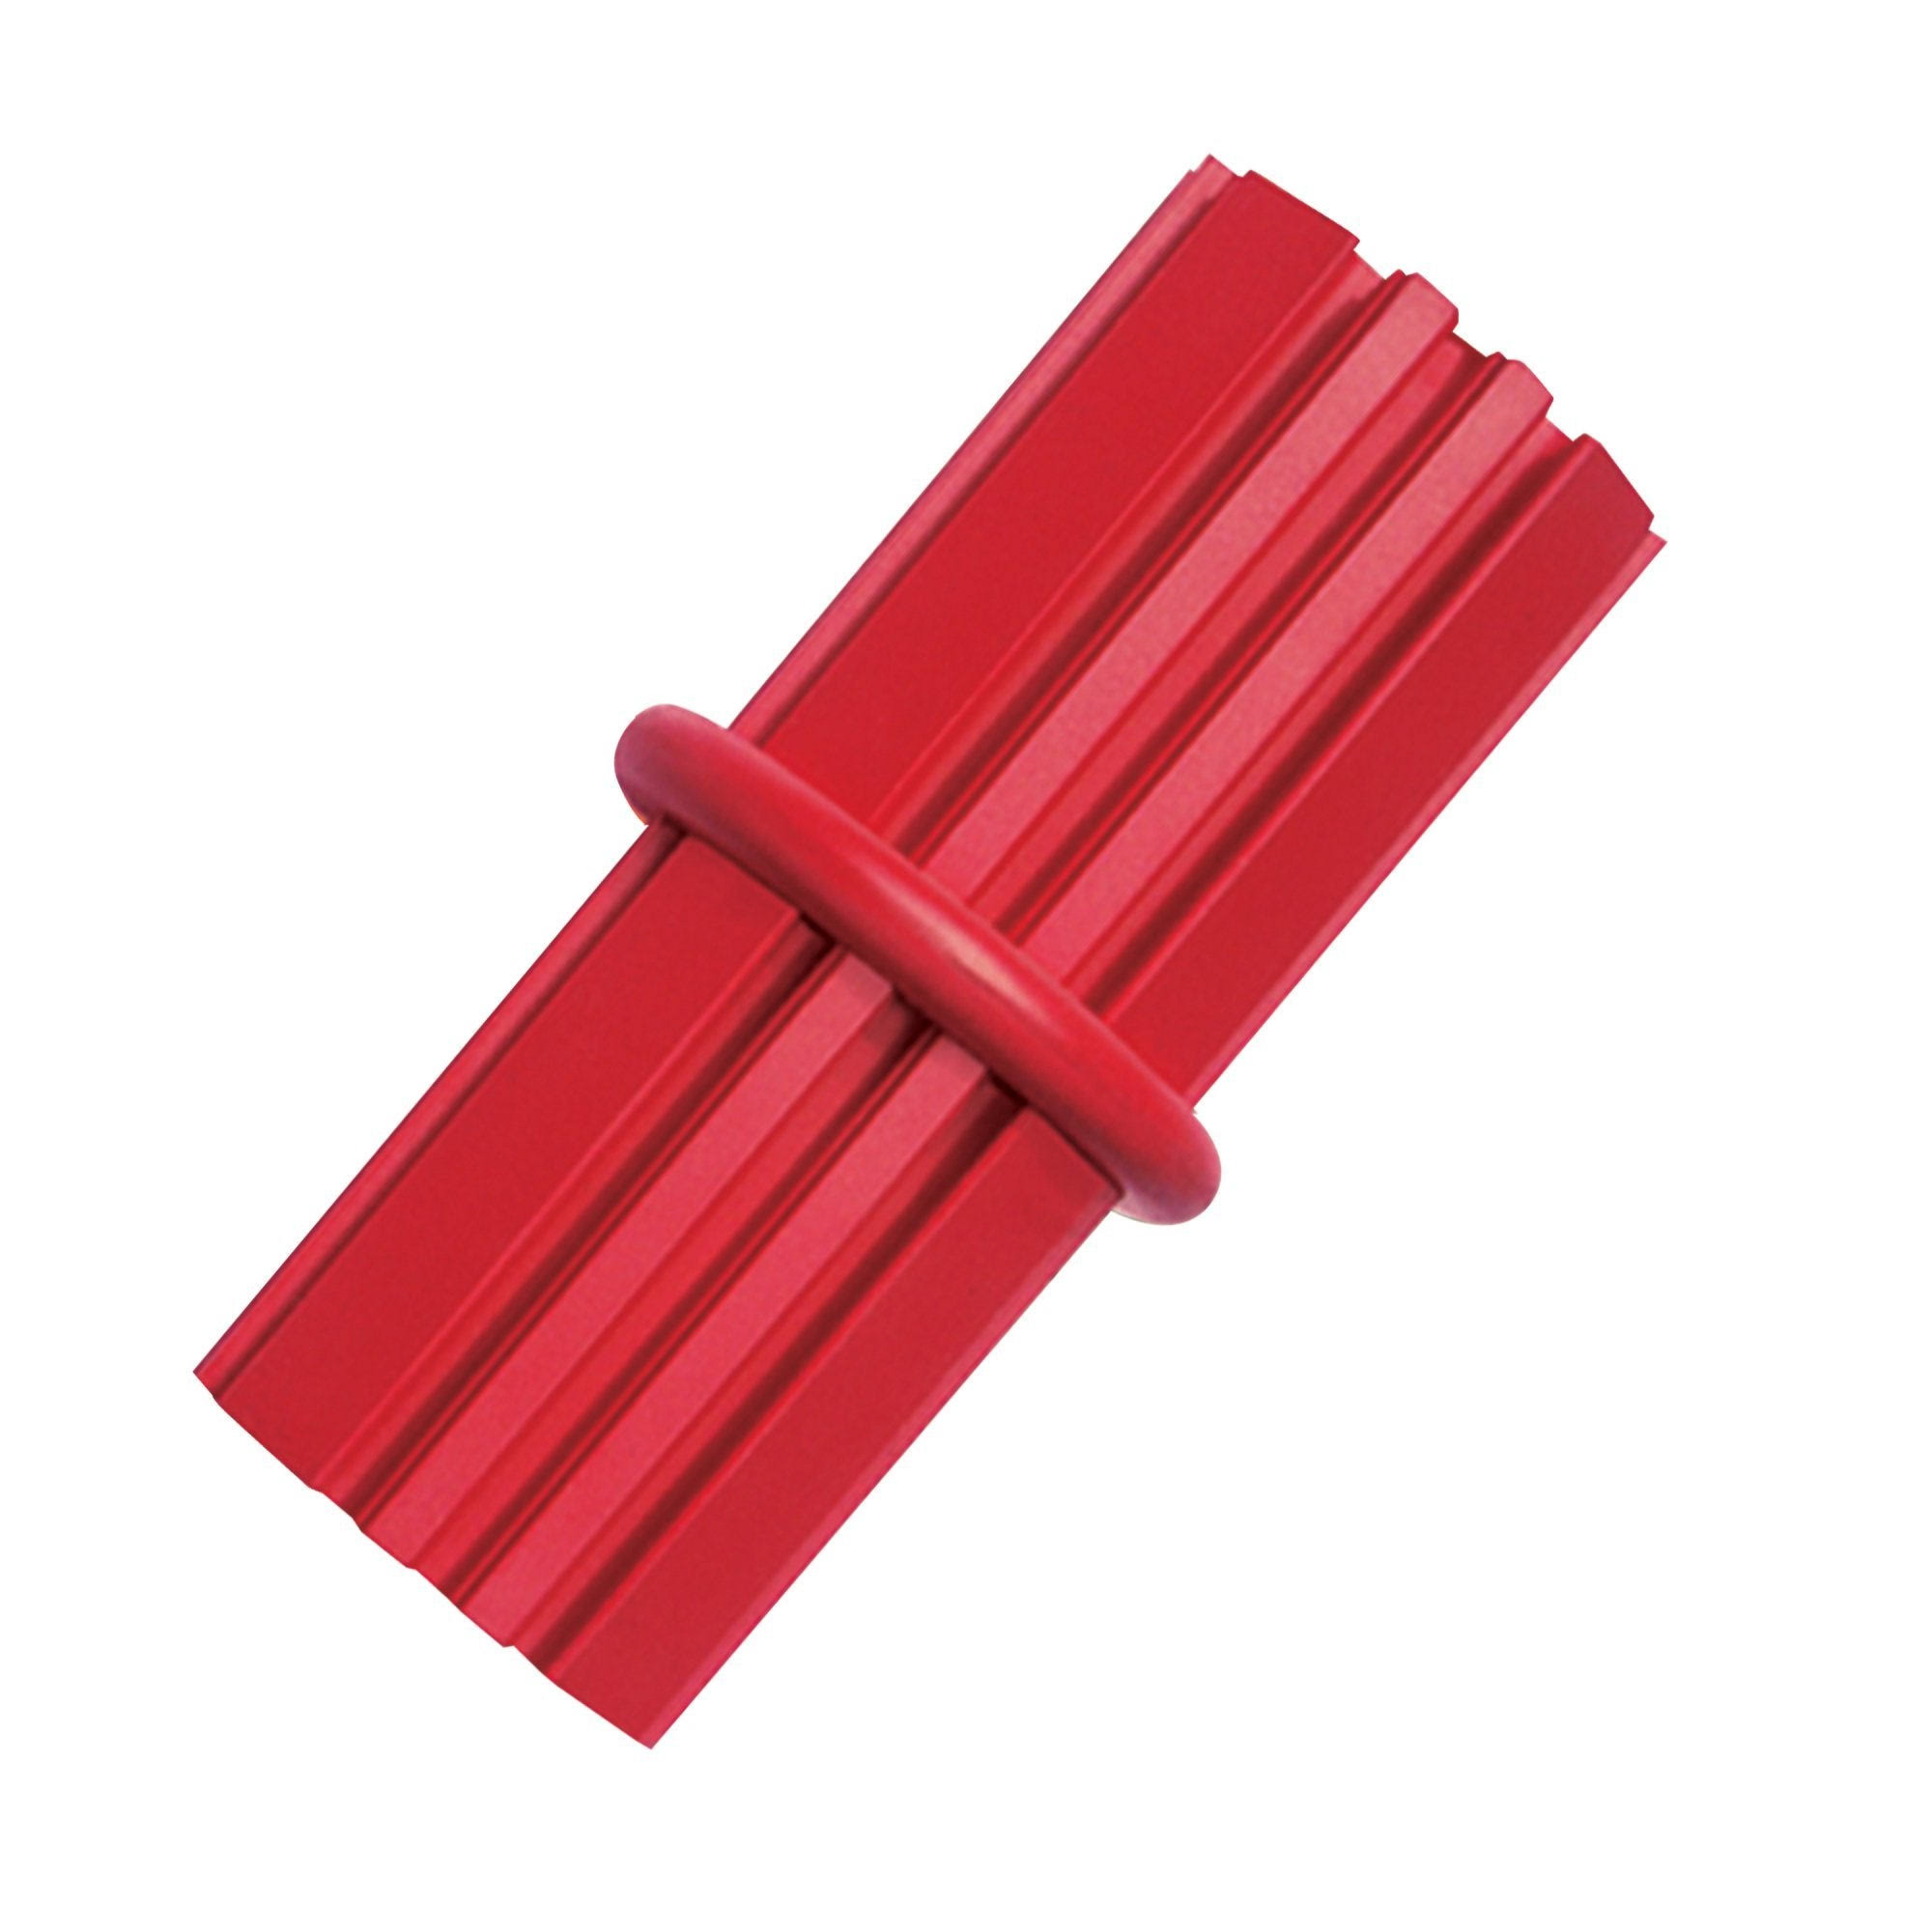 KONG Dental Stick Dog Toy - Red, Small